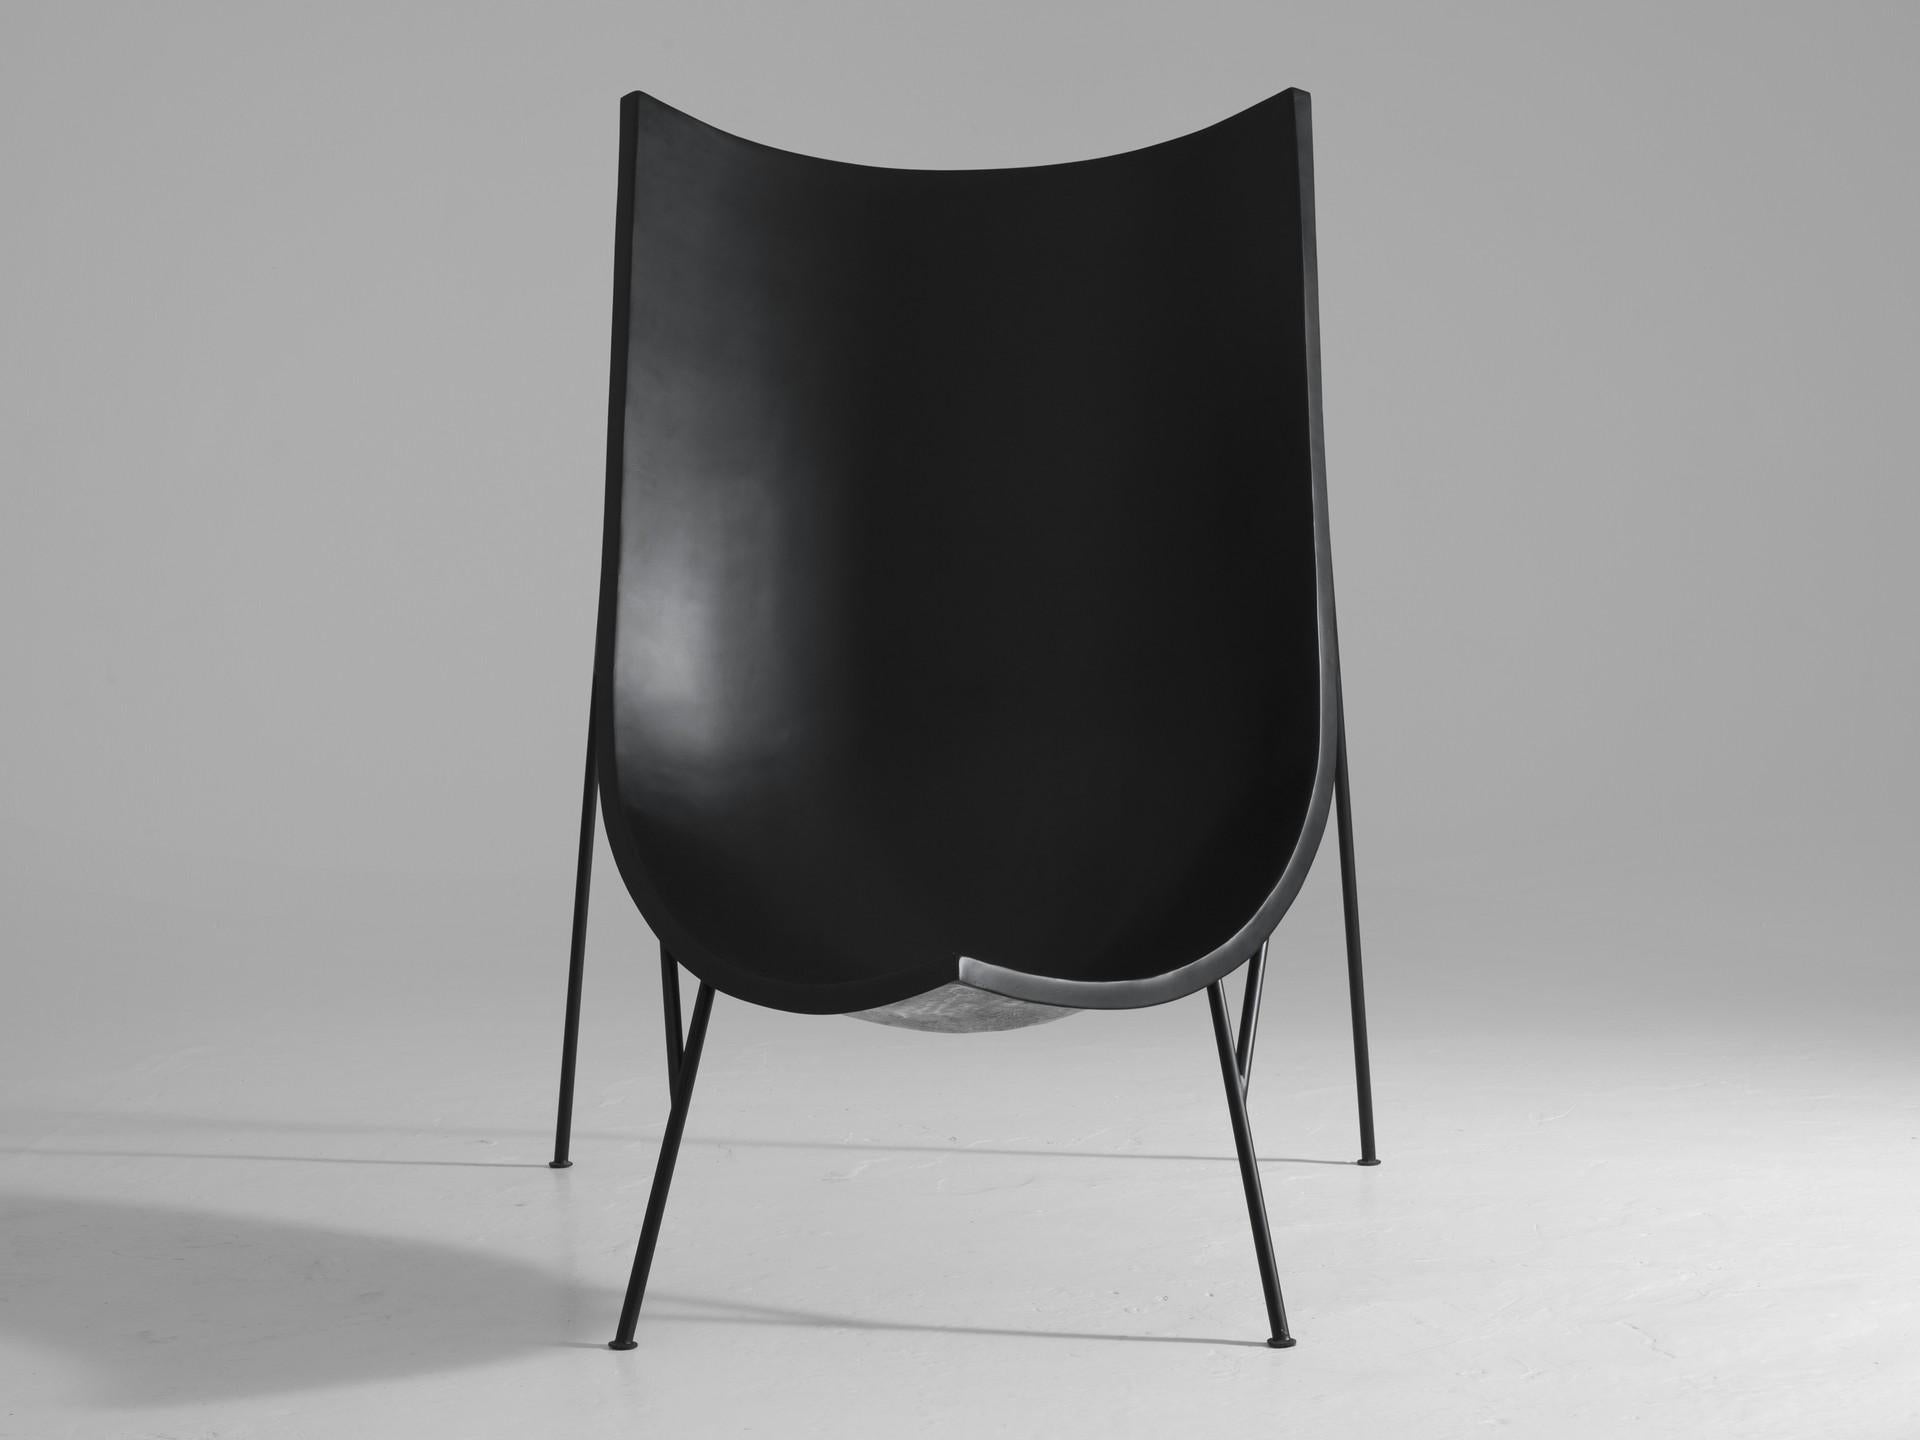 Ombra by Imperfettolab
2016
Designer: Verter Turroni
Dimensions: W 118 x D 135 x H 152 cm 
Materials: Varnished Fibreglass, Metal Base 

Armchair in varnished or upholstered fibreglass, metal base

Imperfetto Lab
Who we are ? We are a family.
Verter